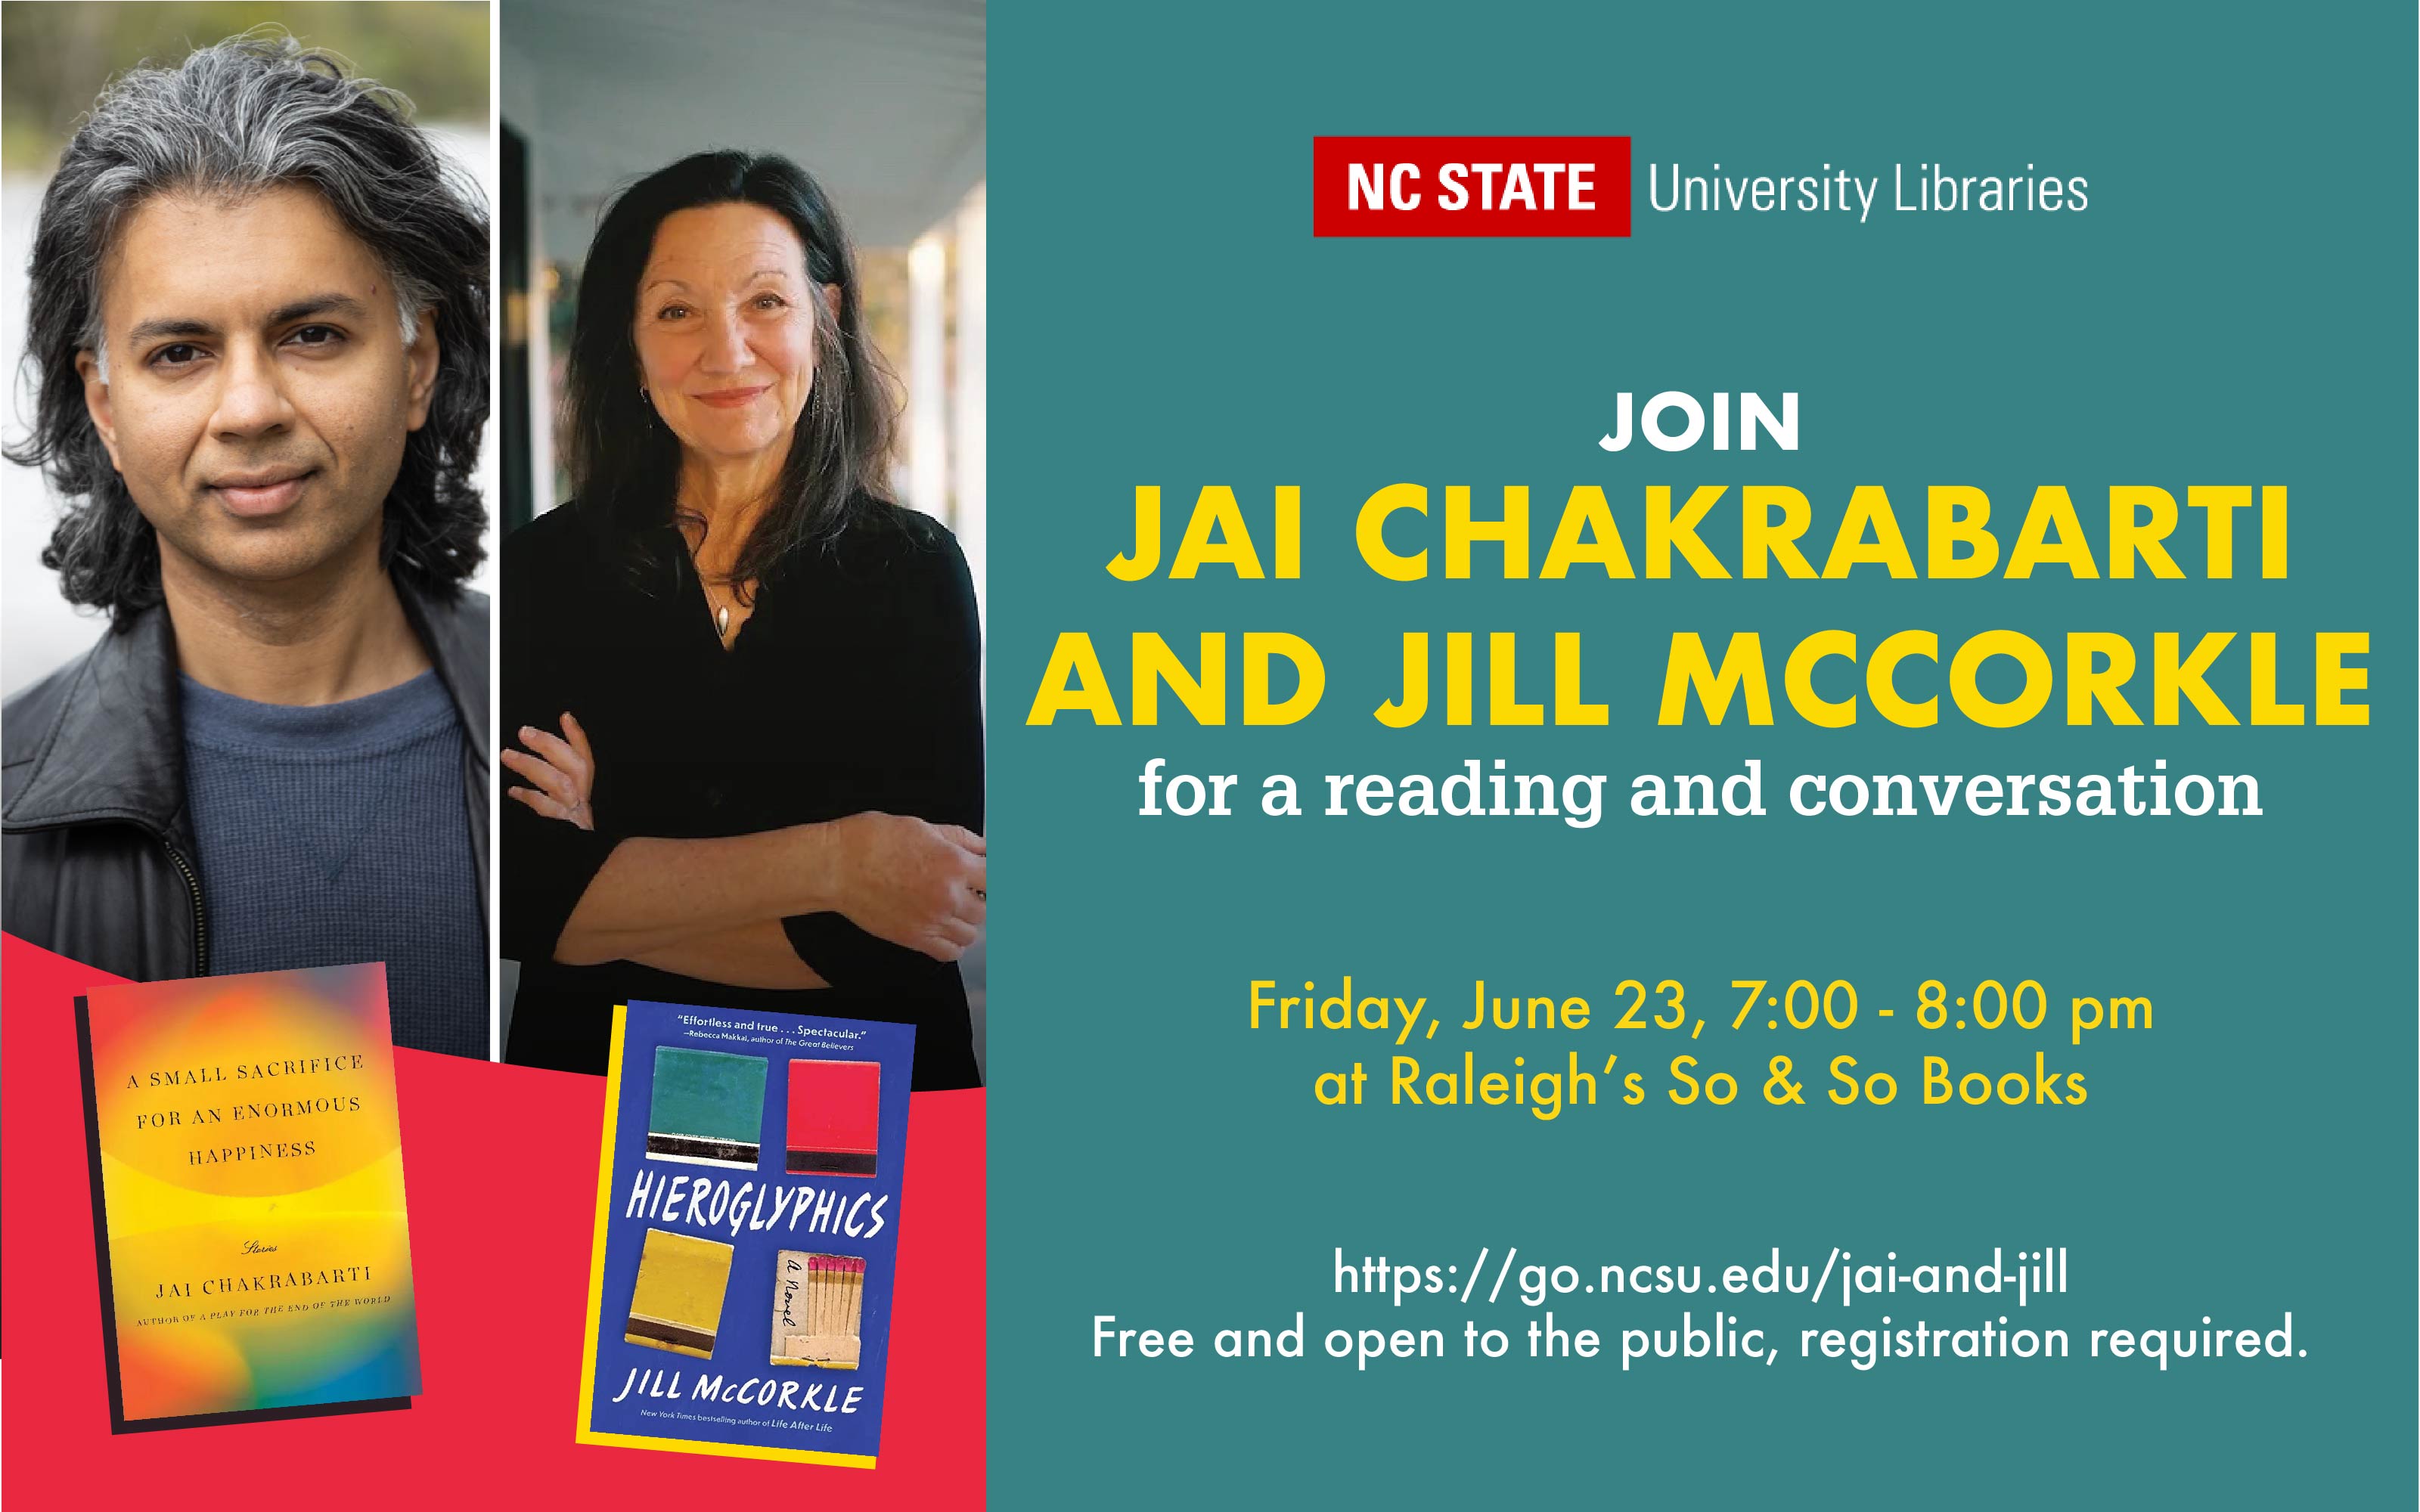 Authors Jai Chakrabarty and Jill McCorkle appear at Raleigh's So & So Books, June 23